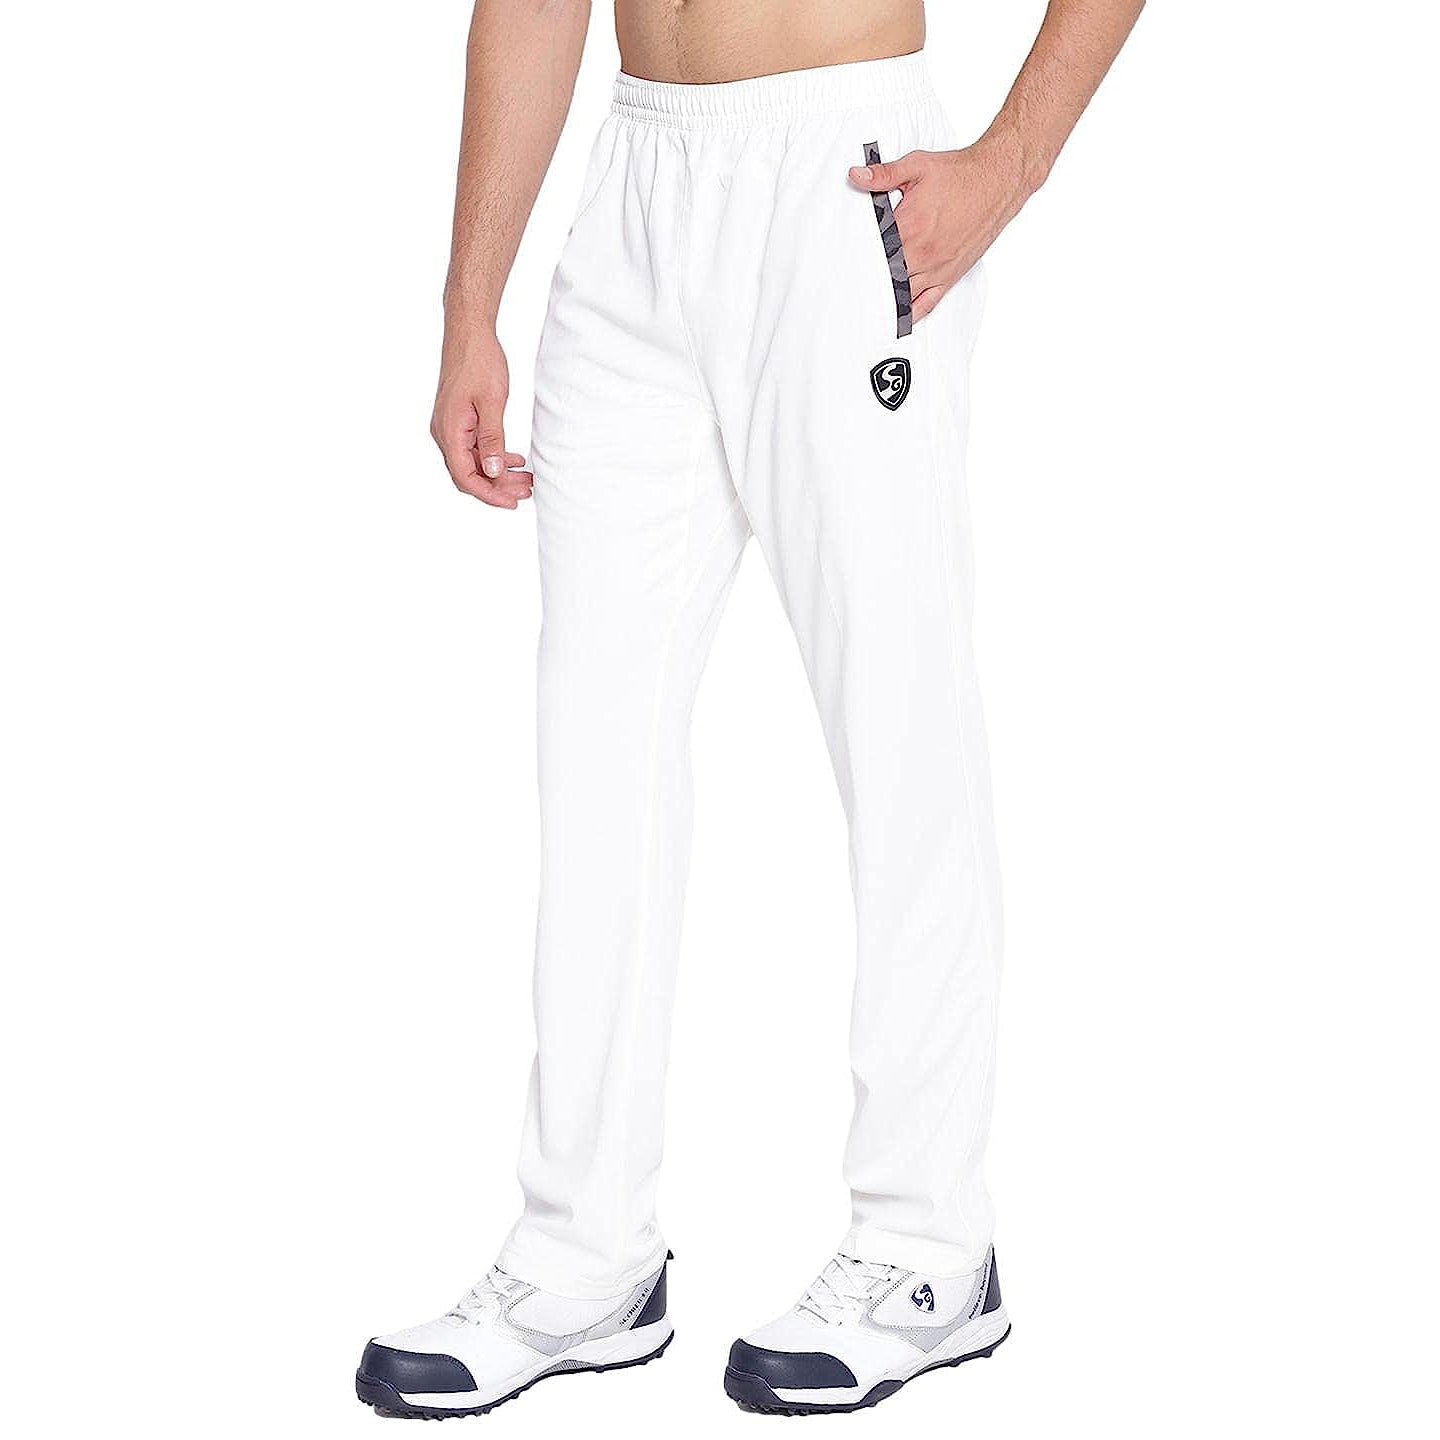 Nike Cricket Track Trousers Sweatshirts Sweaters - Buy Nike Cricket Track  Trousers Sweatshirts Sweaters online in India